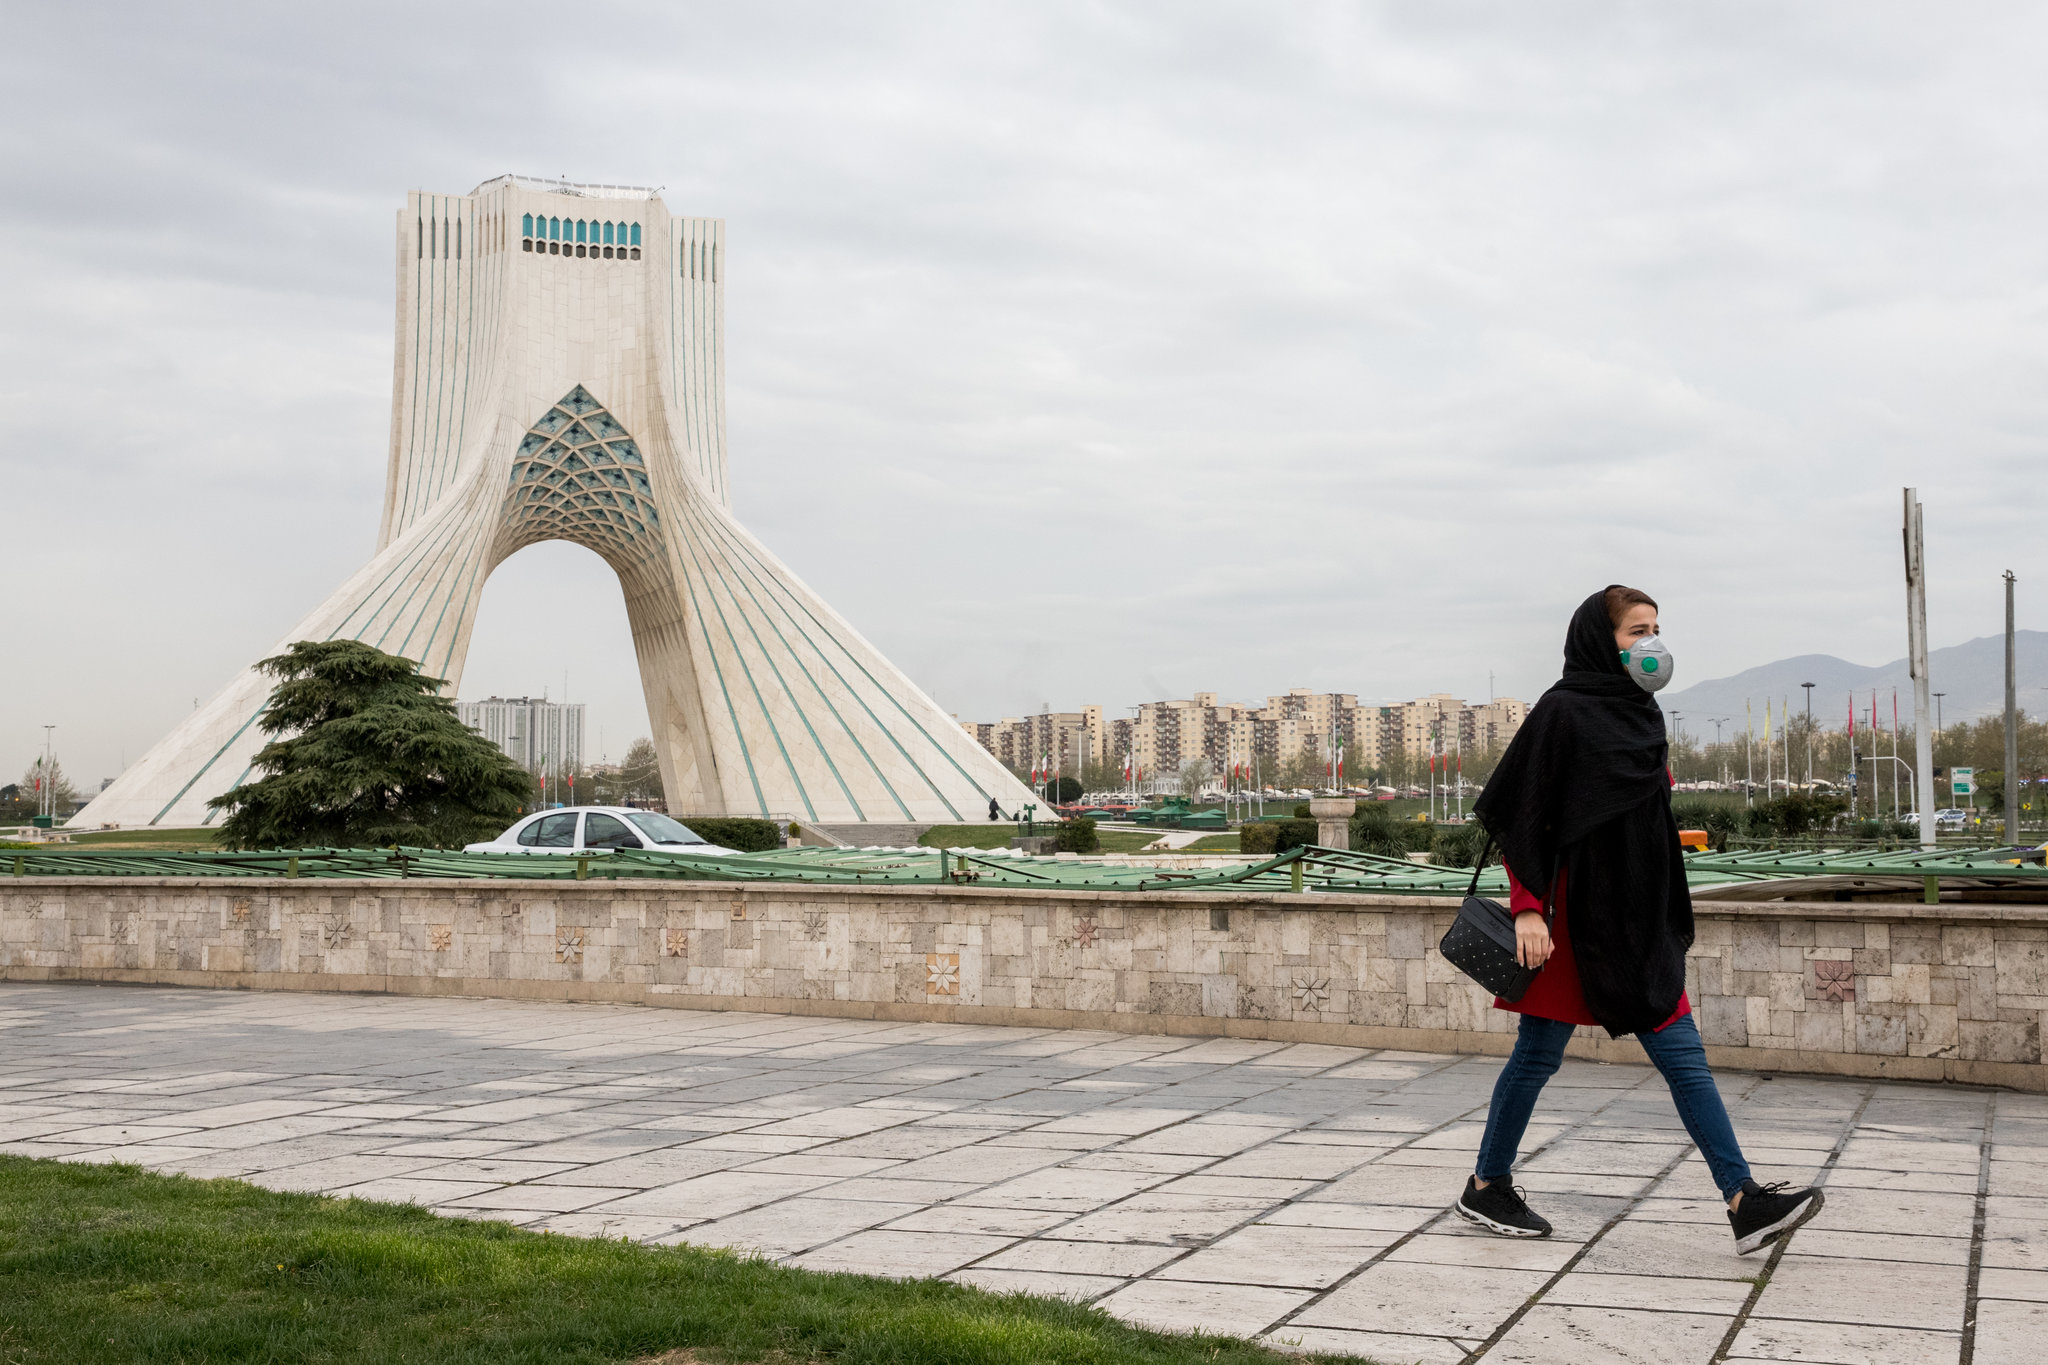 Restrictions for foreign tourists to travel to Iran escalated